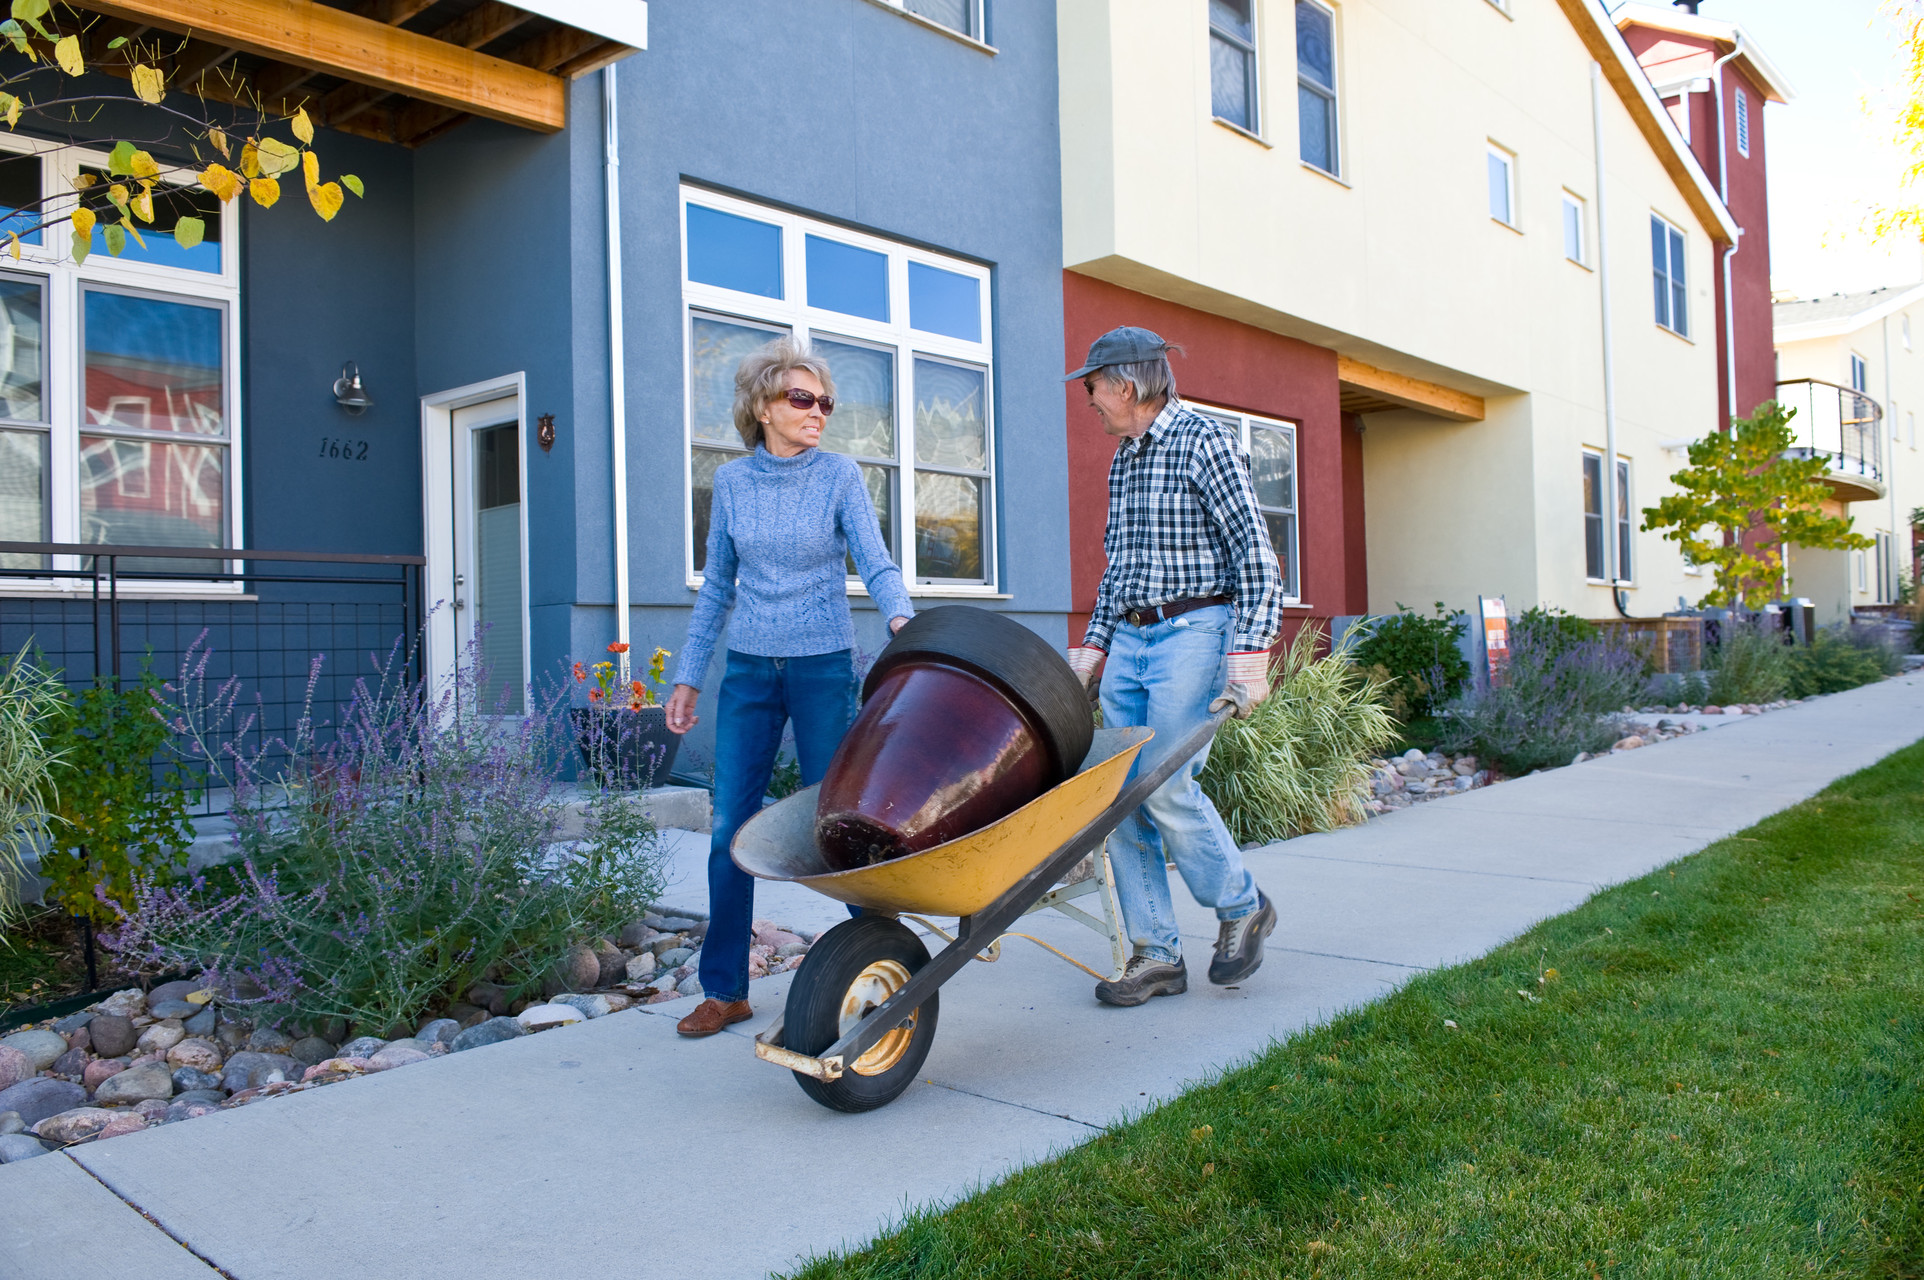 Save your cohousing group endless hassles, and wasted development money.